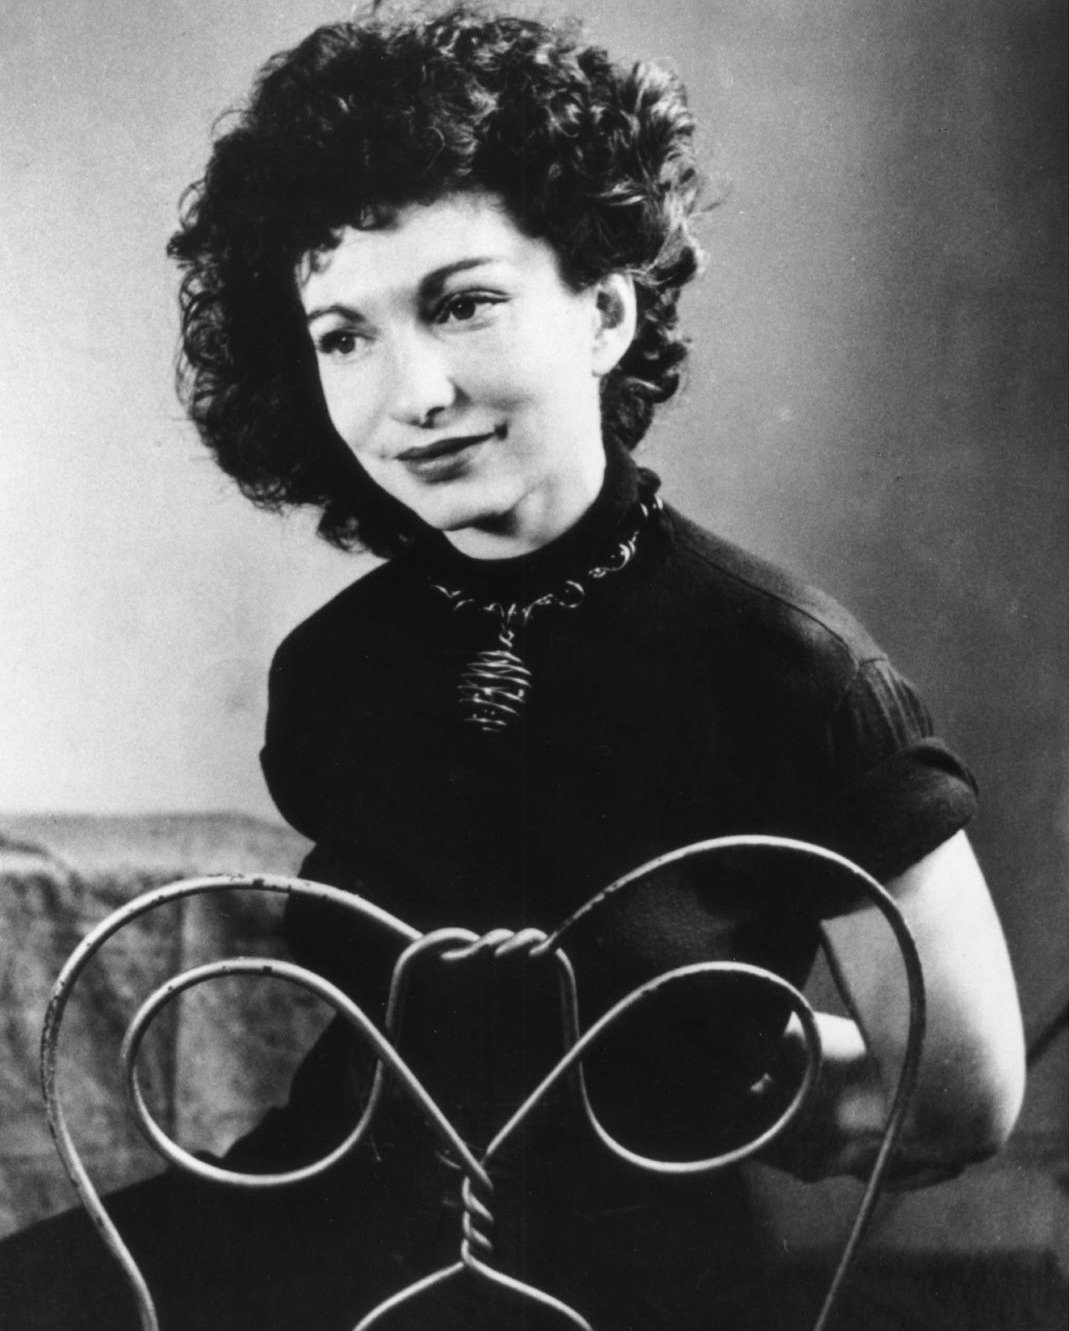 a-bittersweet-life:
“ The most important part of your equipment is yourself: your mobile body, your imaginative mind, and your freedom to use both. Make sure you do use them.
Maya Deren
”